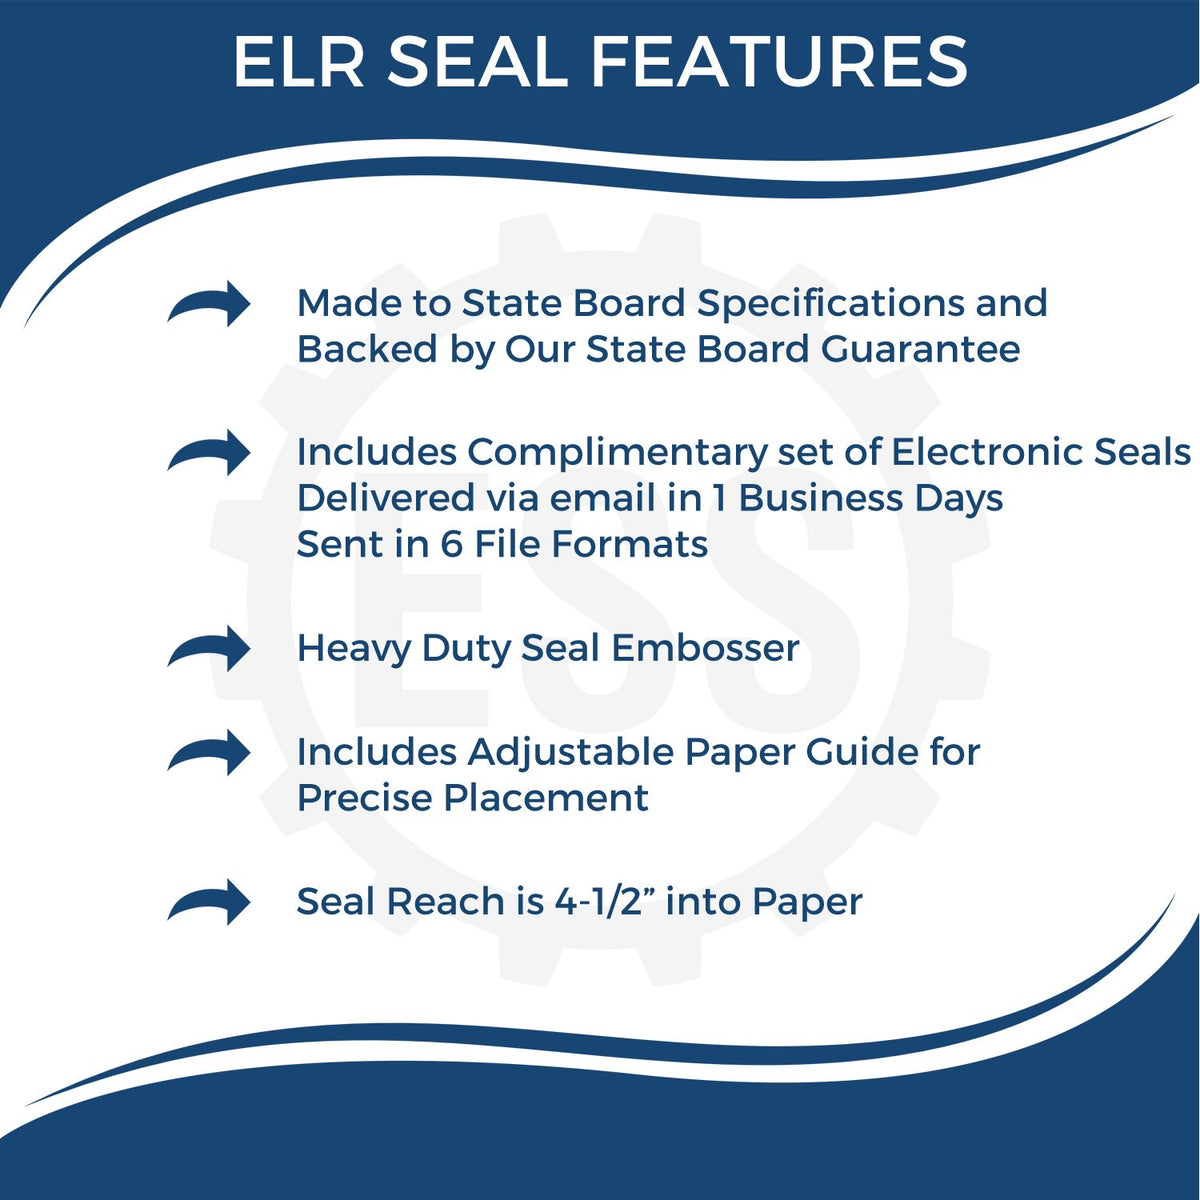 A picture of an infographic highlighting the selling points for the Extended Long Reach Alaska Architect Seal Embosser